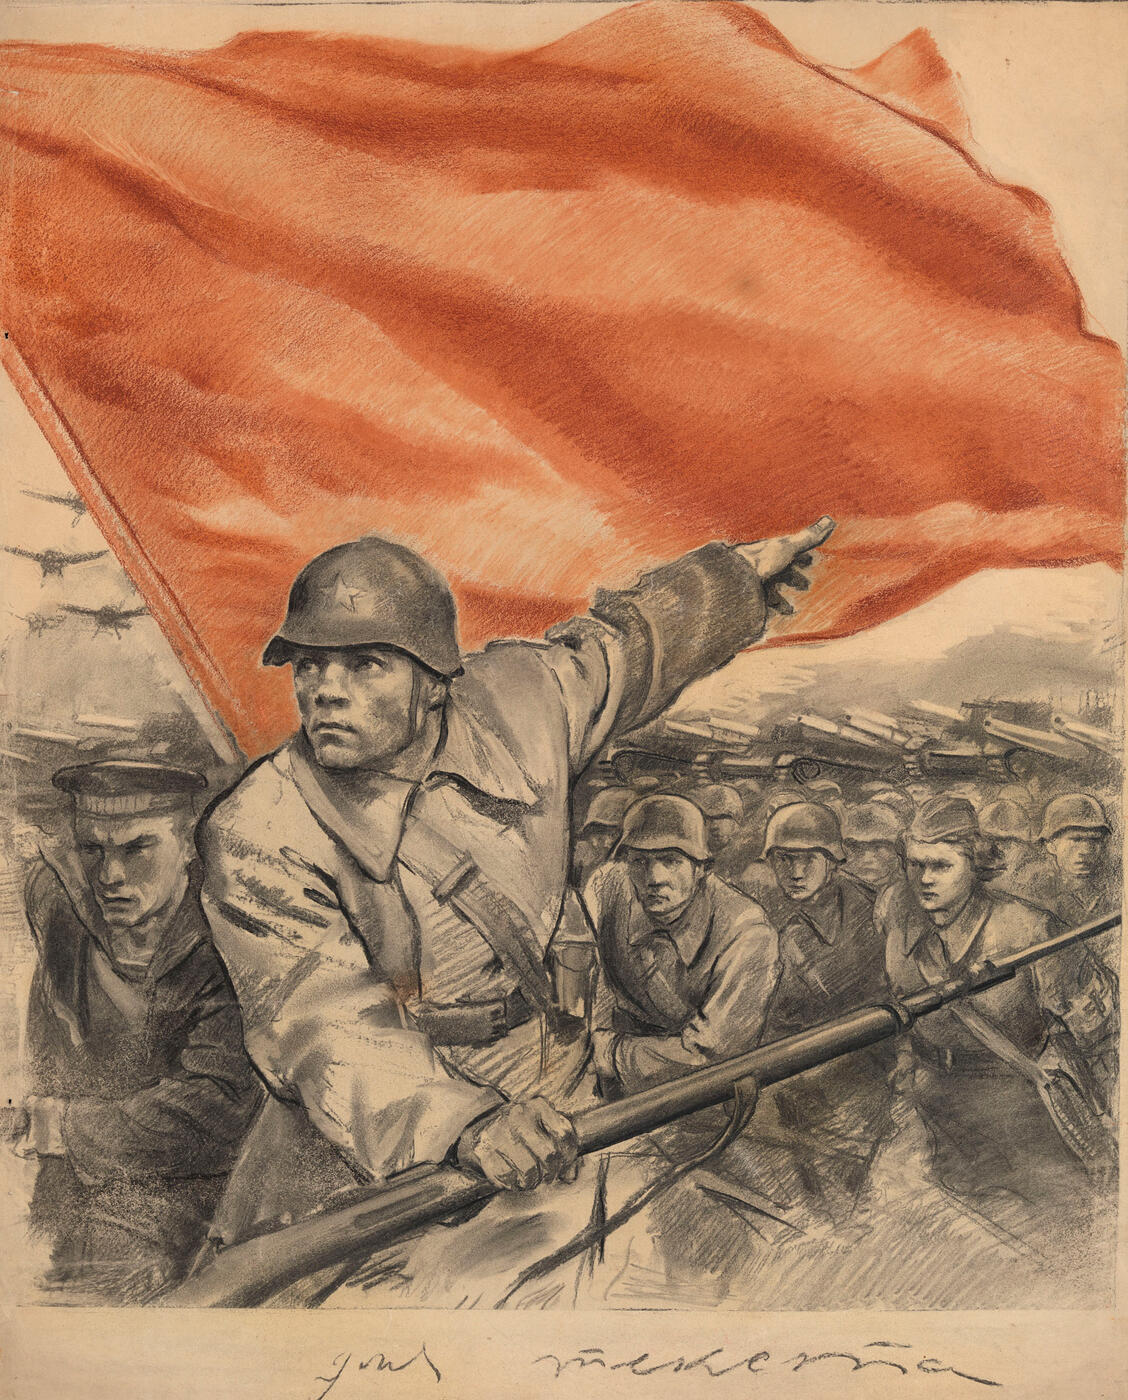 Design for the Poster "For the Motherland".